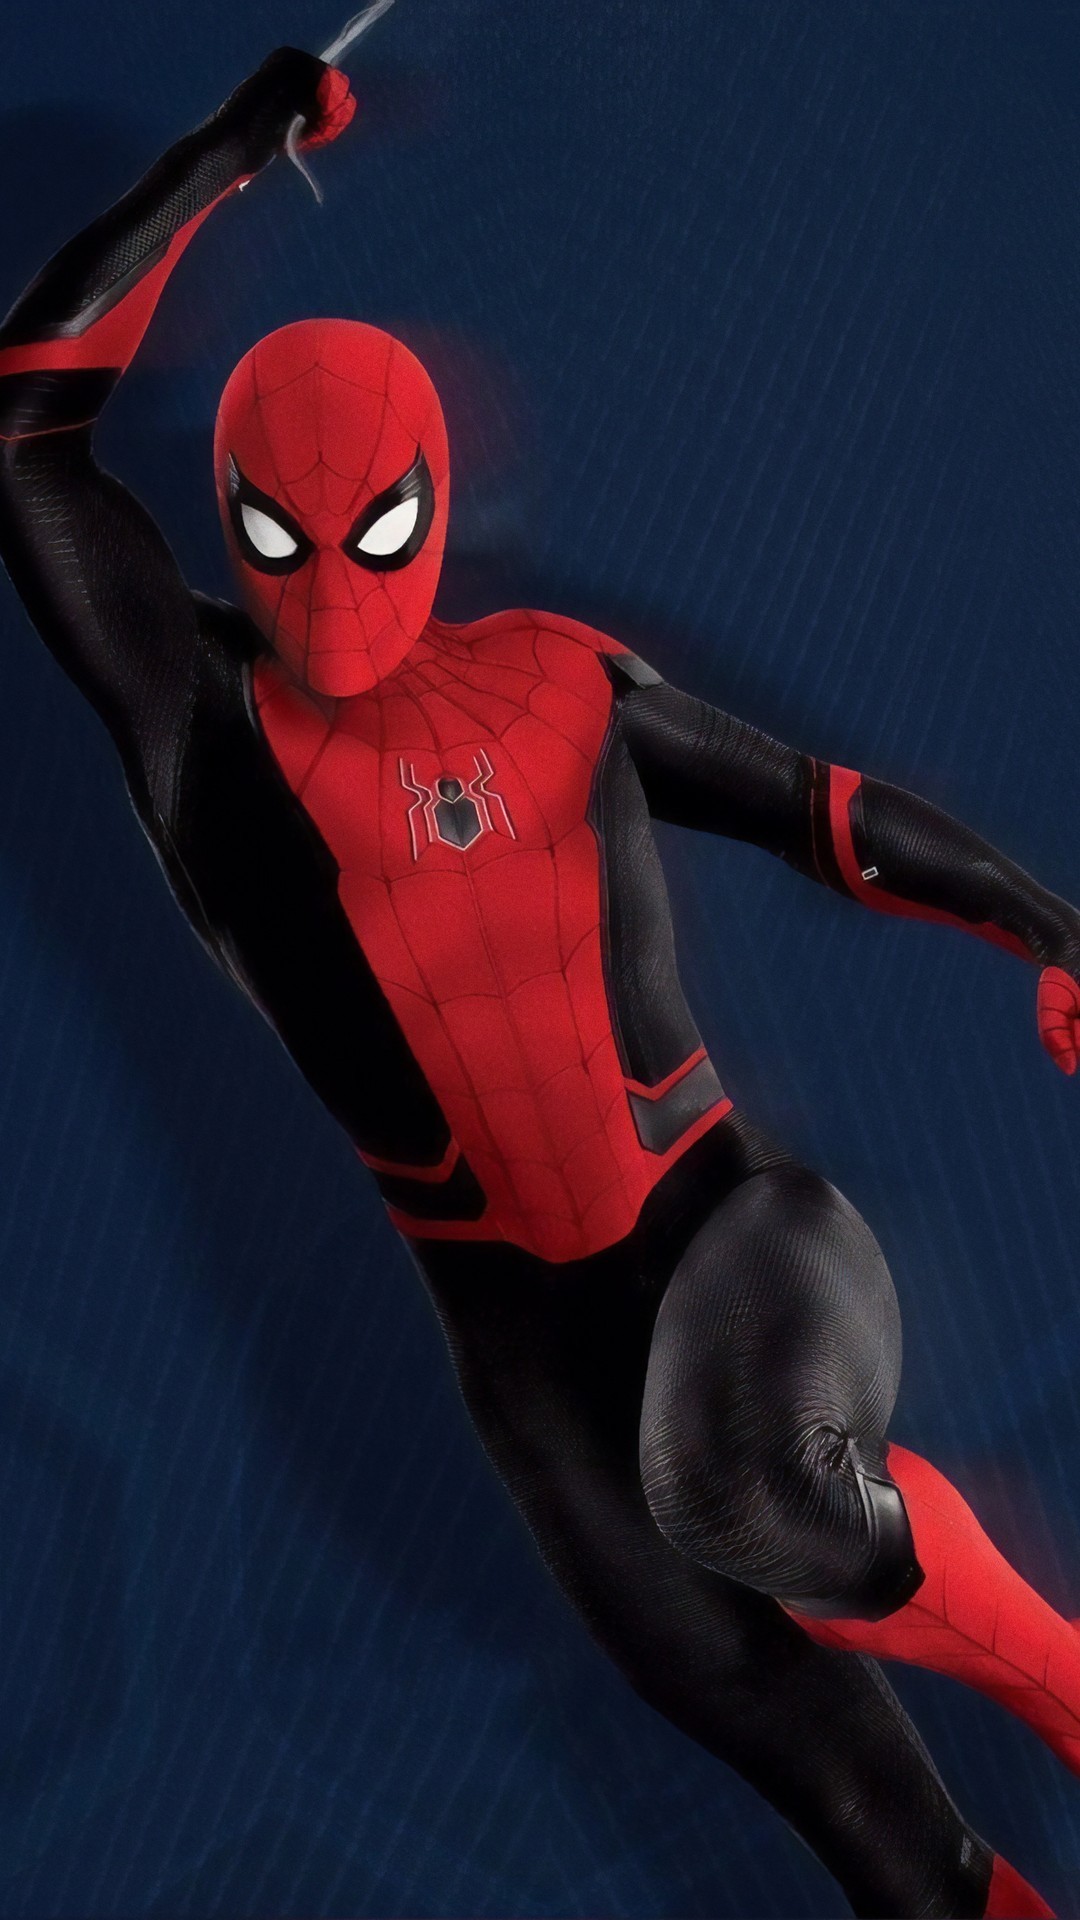 Spider-Man Far From Home Wallpaper iPhone with high-resolution 1080x1920 pixel. You can use this wallpaper for your iPhone 5, 6, 7, 8, X, XS, XR backgrounds, Mobile Screensaver, or iPad Lock Screen